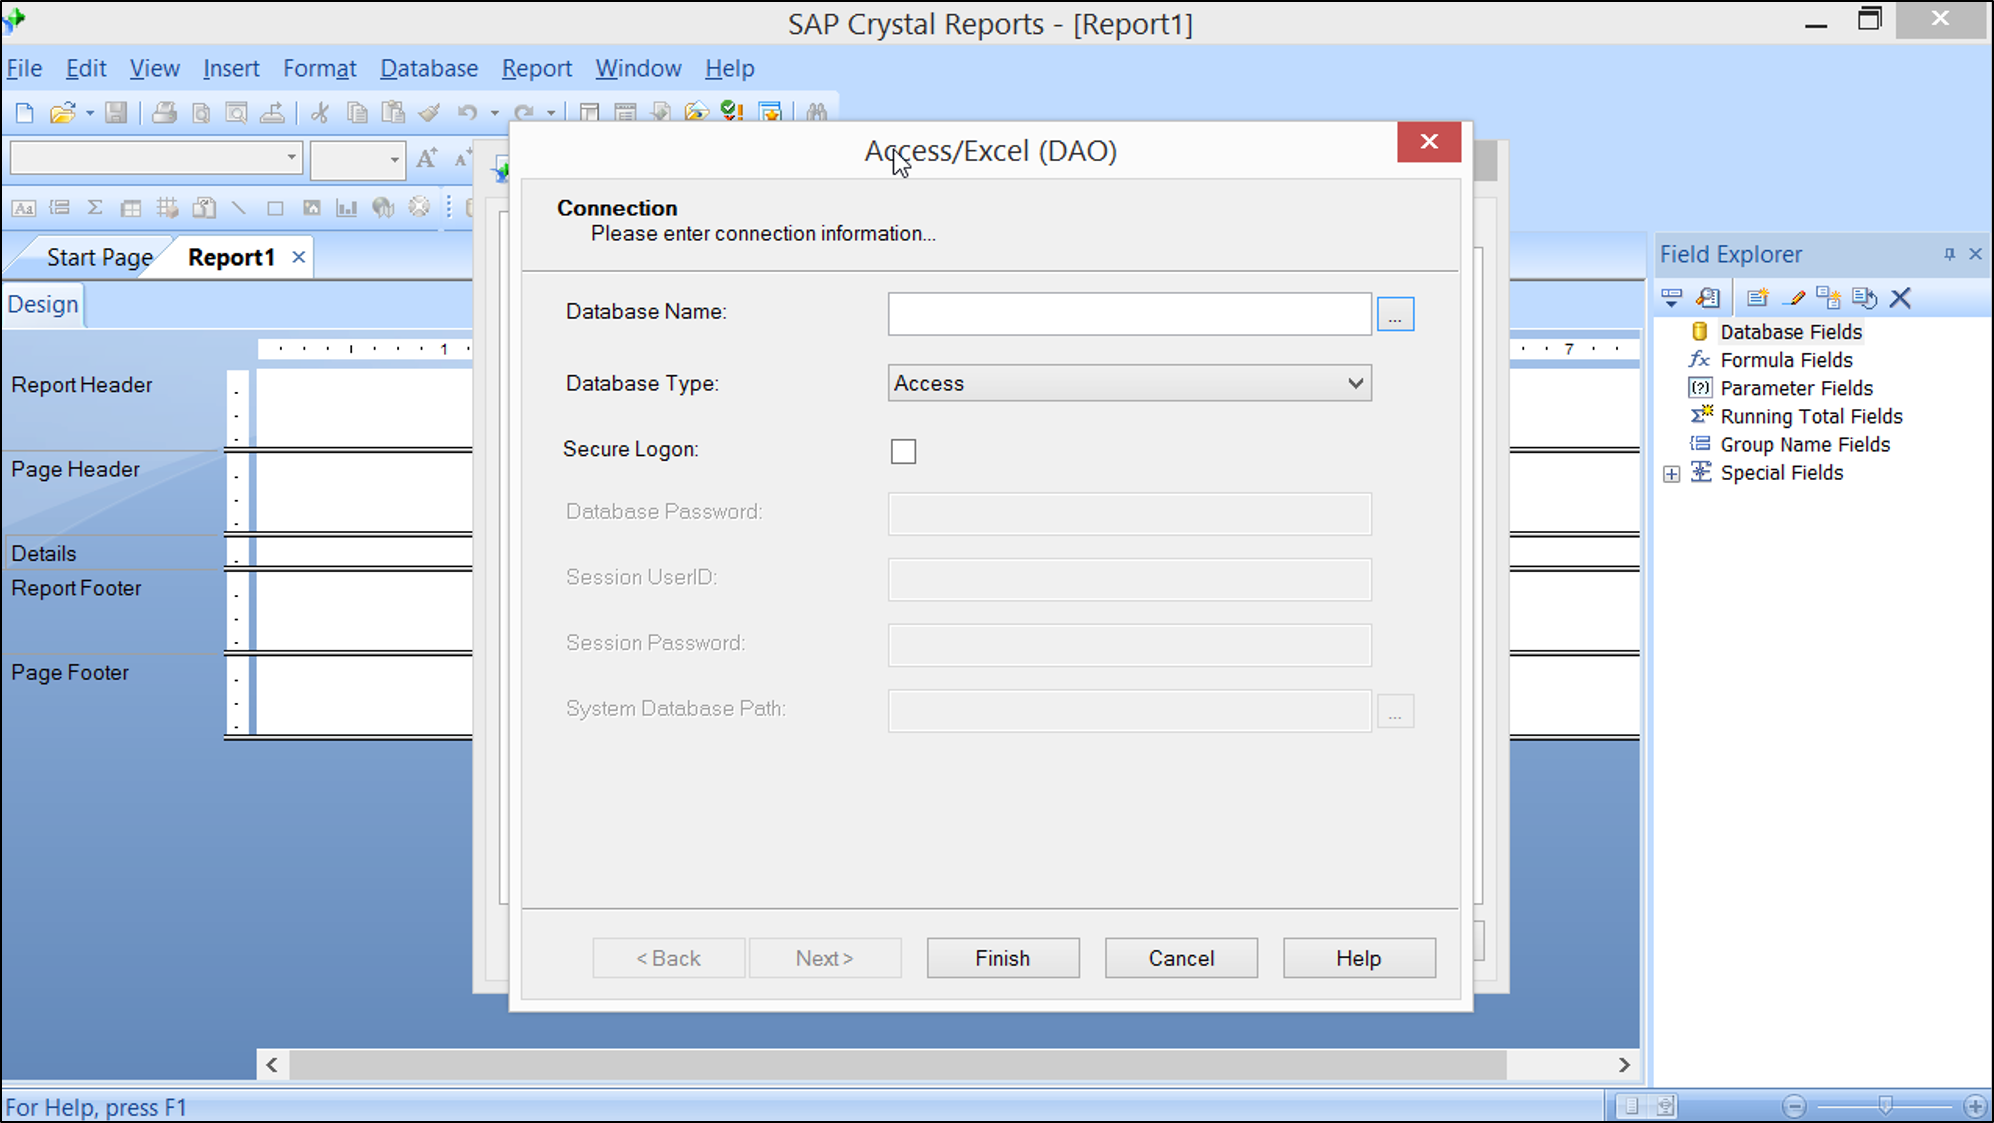 crystal report viewer control